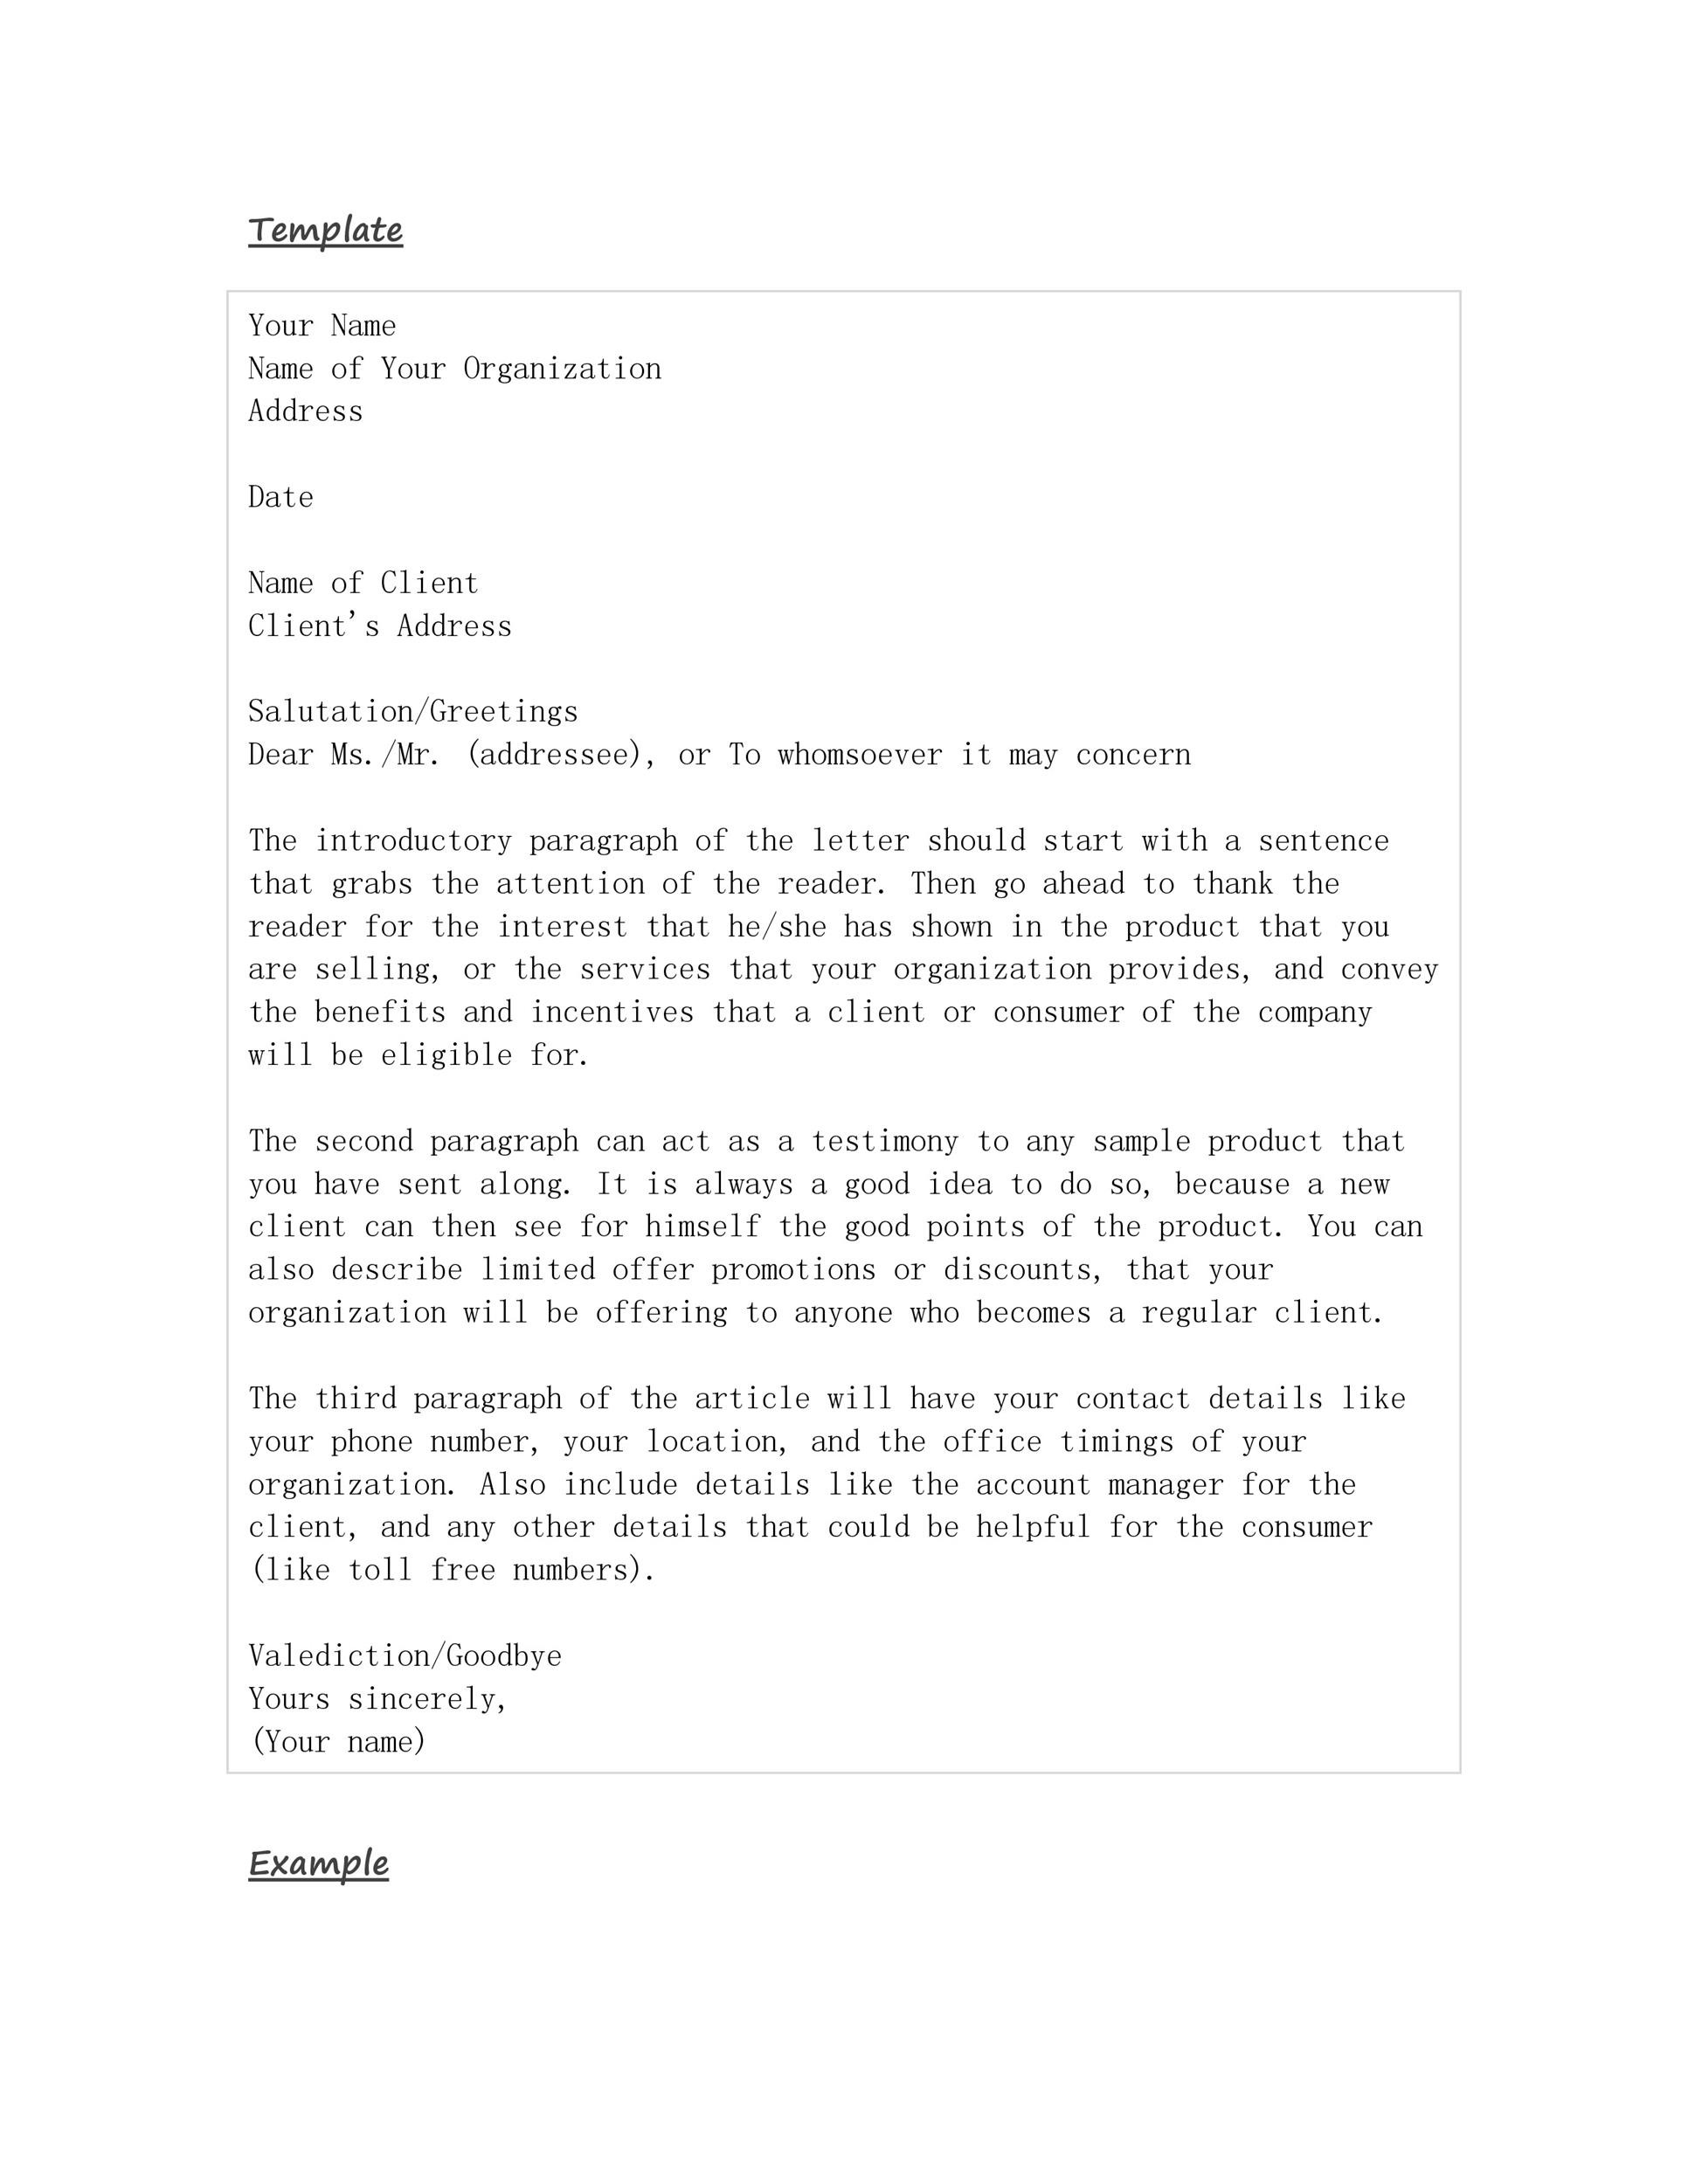 Sample Letter To Client Offering Services from templatelab.com